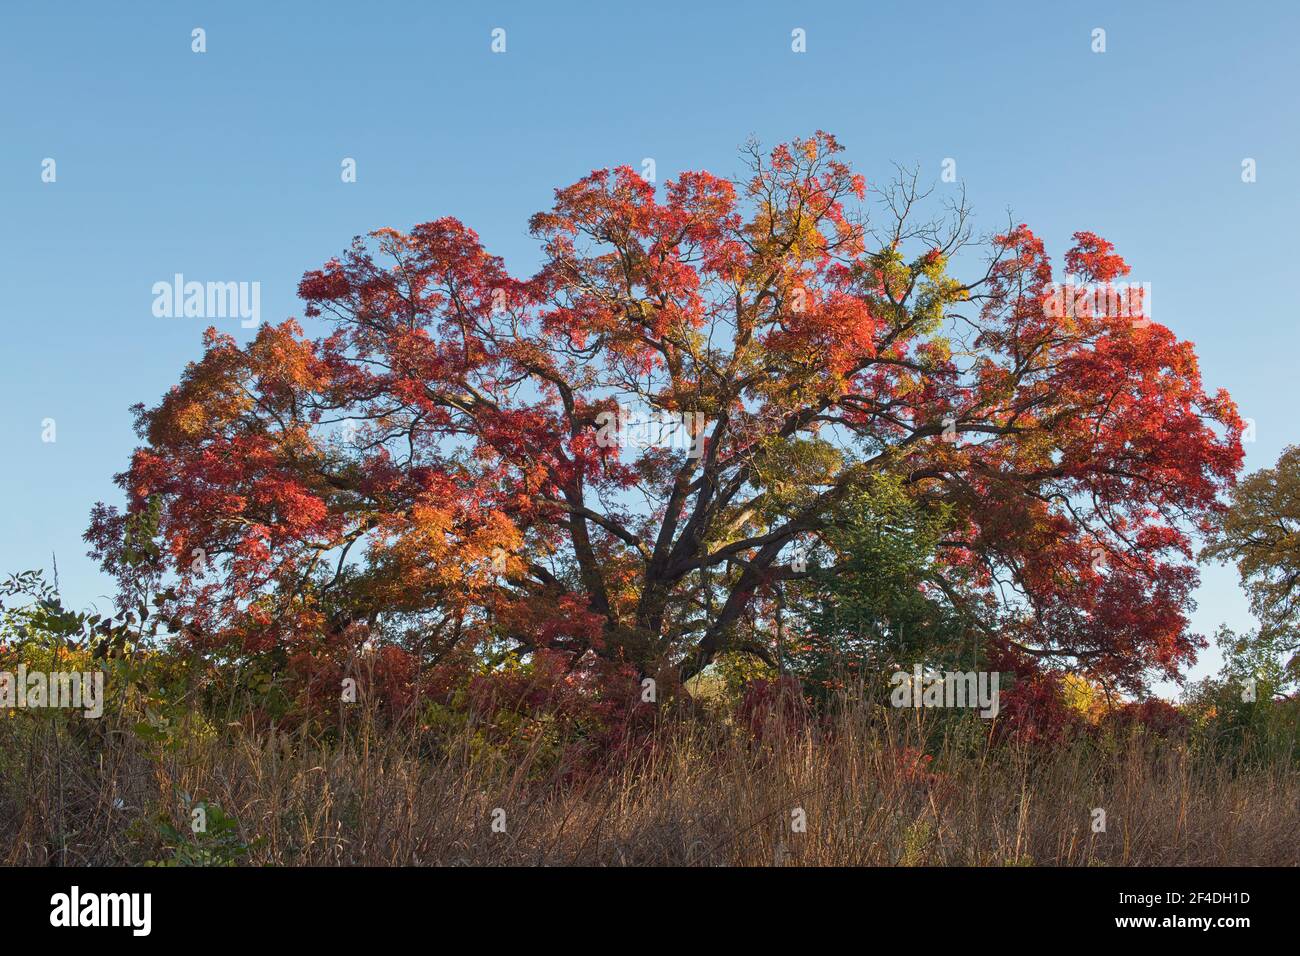 One oak tree in autumn with colorful fall leaves. Series of four seasons. Stock Photo